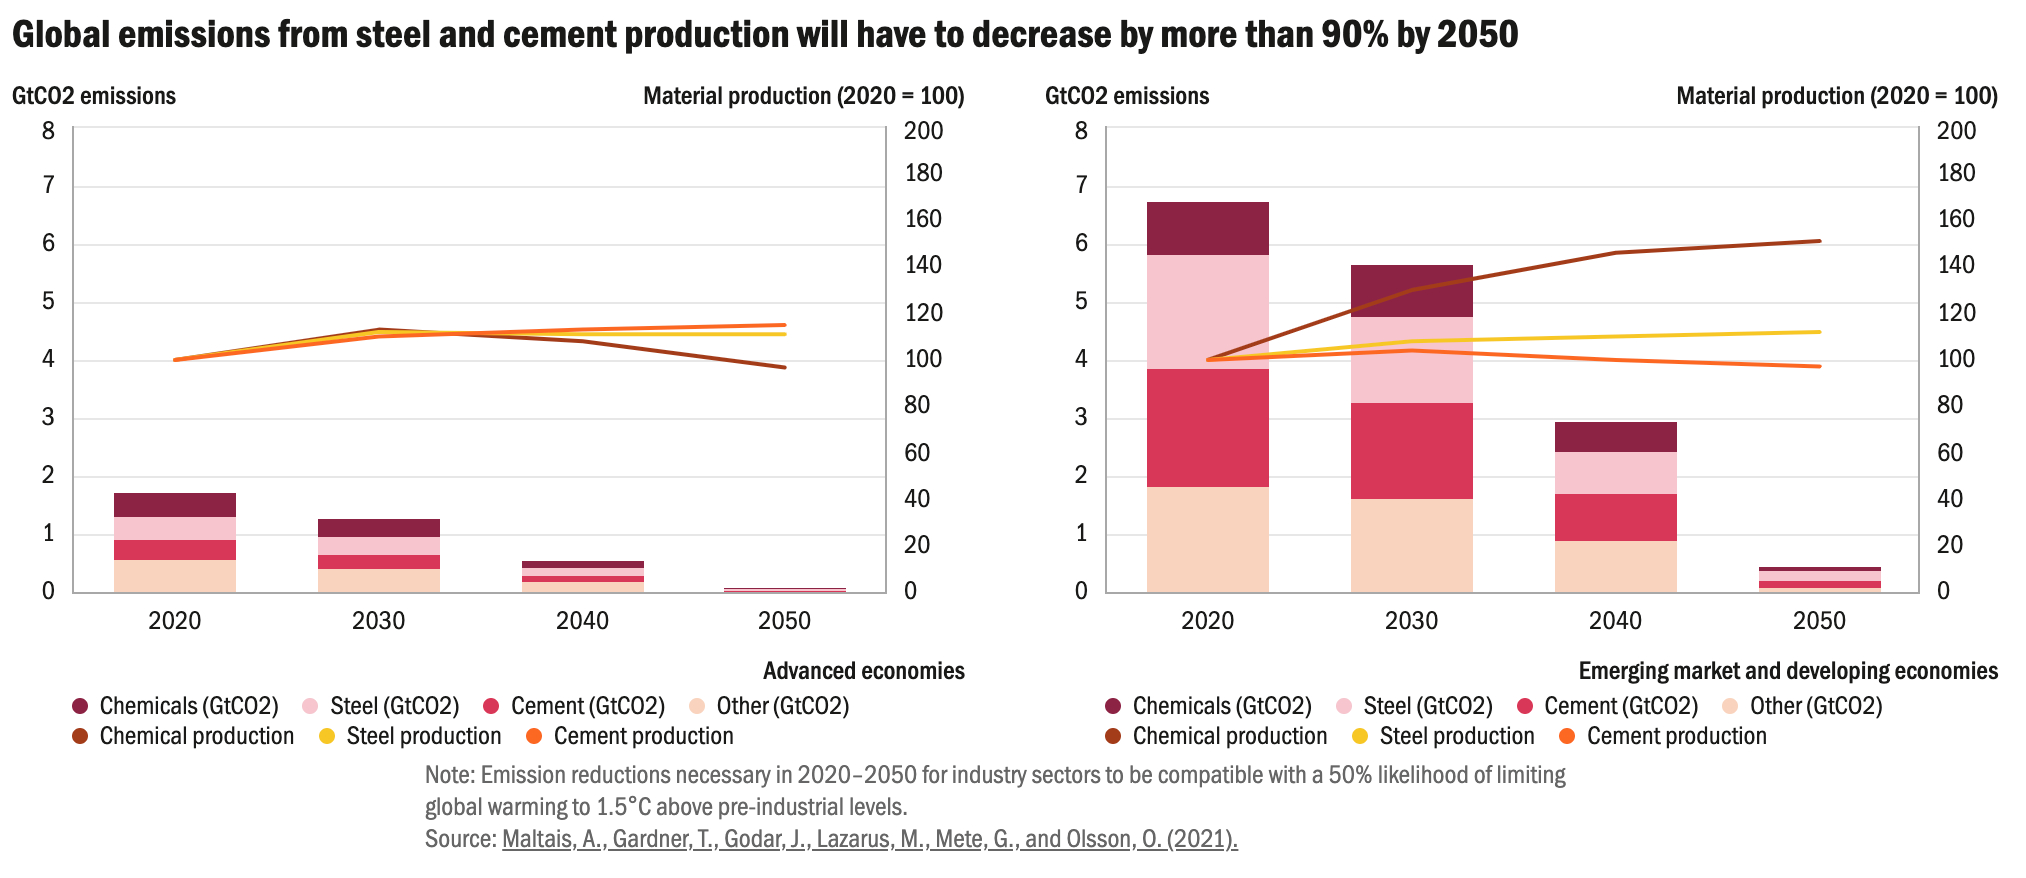 Global emissions from steel and cement production will have to decrease by more than 90% by 2050